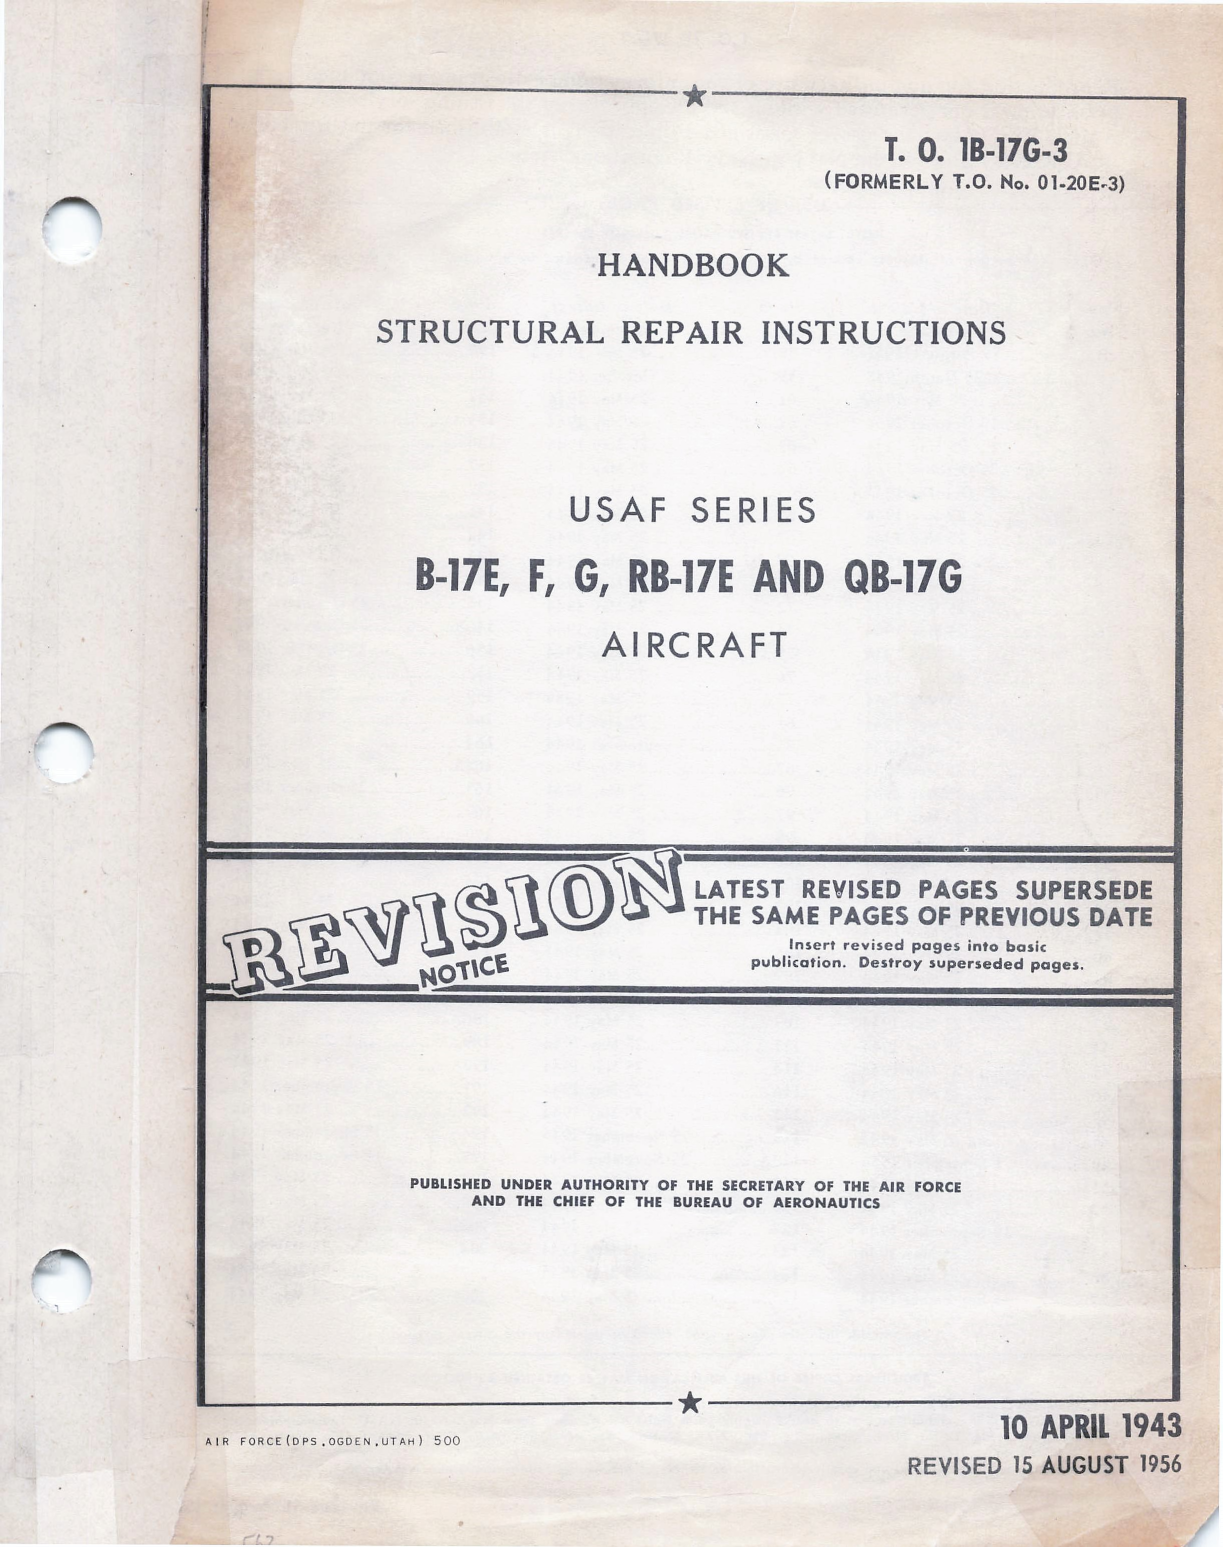 Sample page 1 from AirCorps Library document: Structural Repair Instructions for the B-17E, B-17F, B-17G, RB-17E and QB-17G